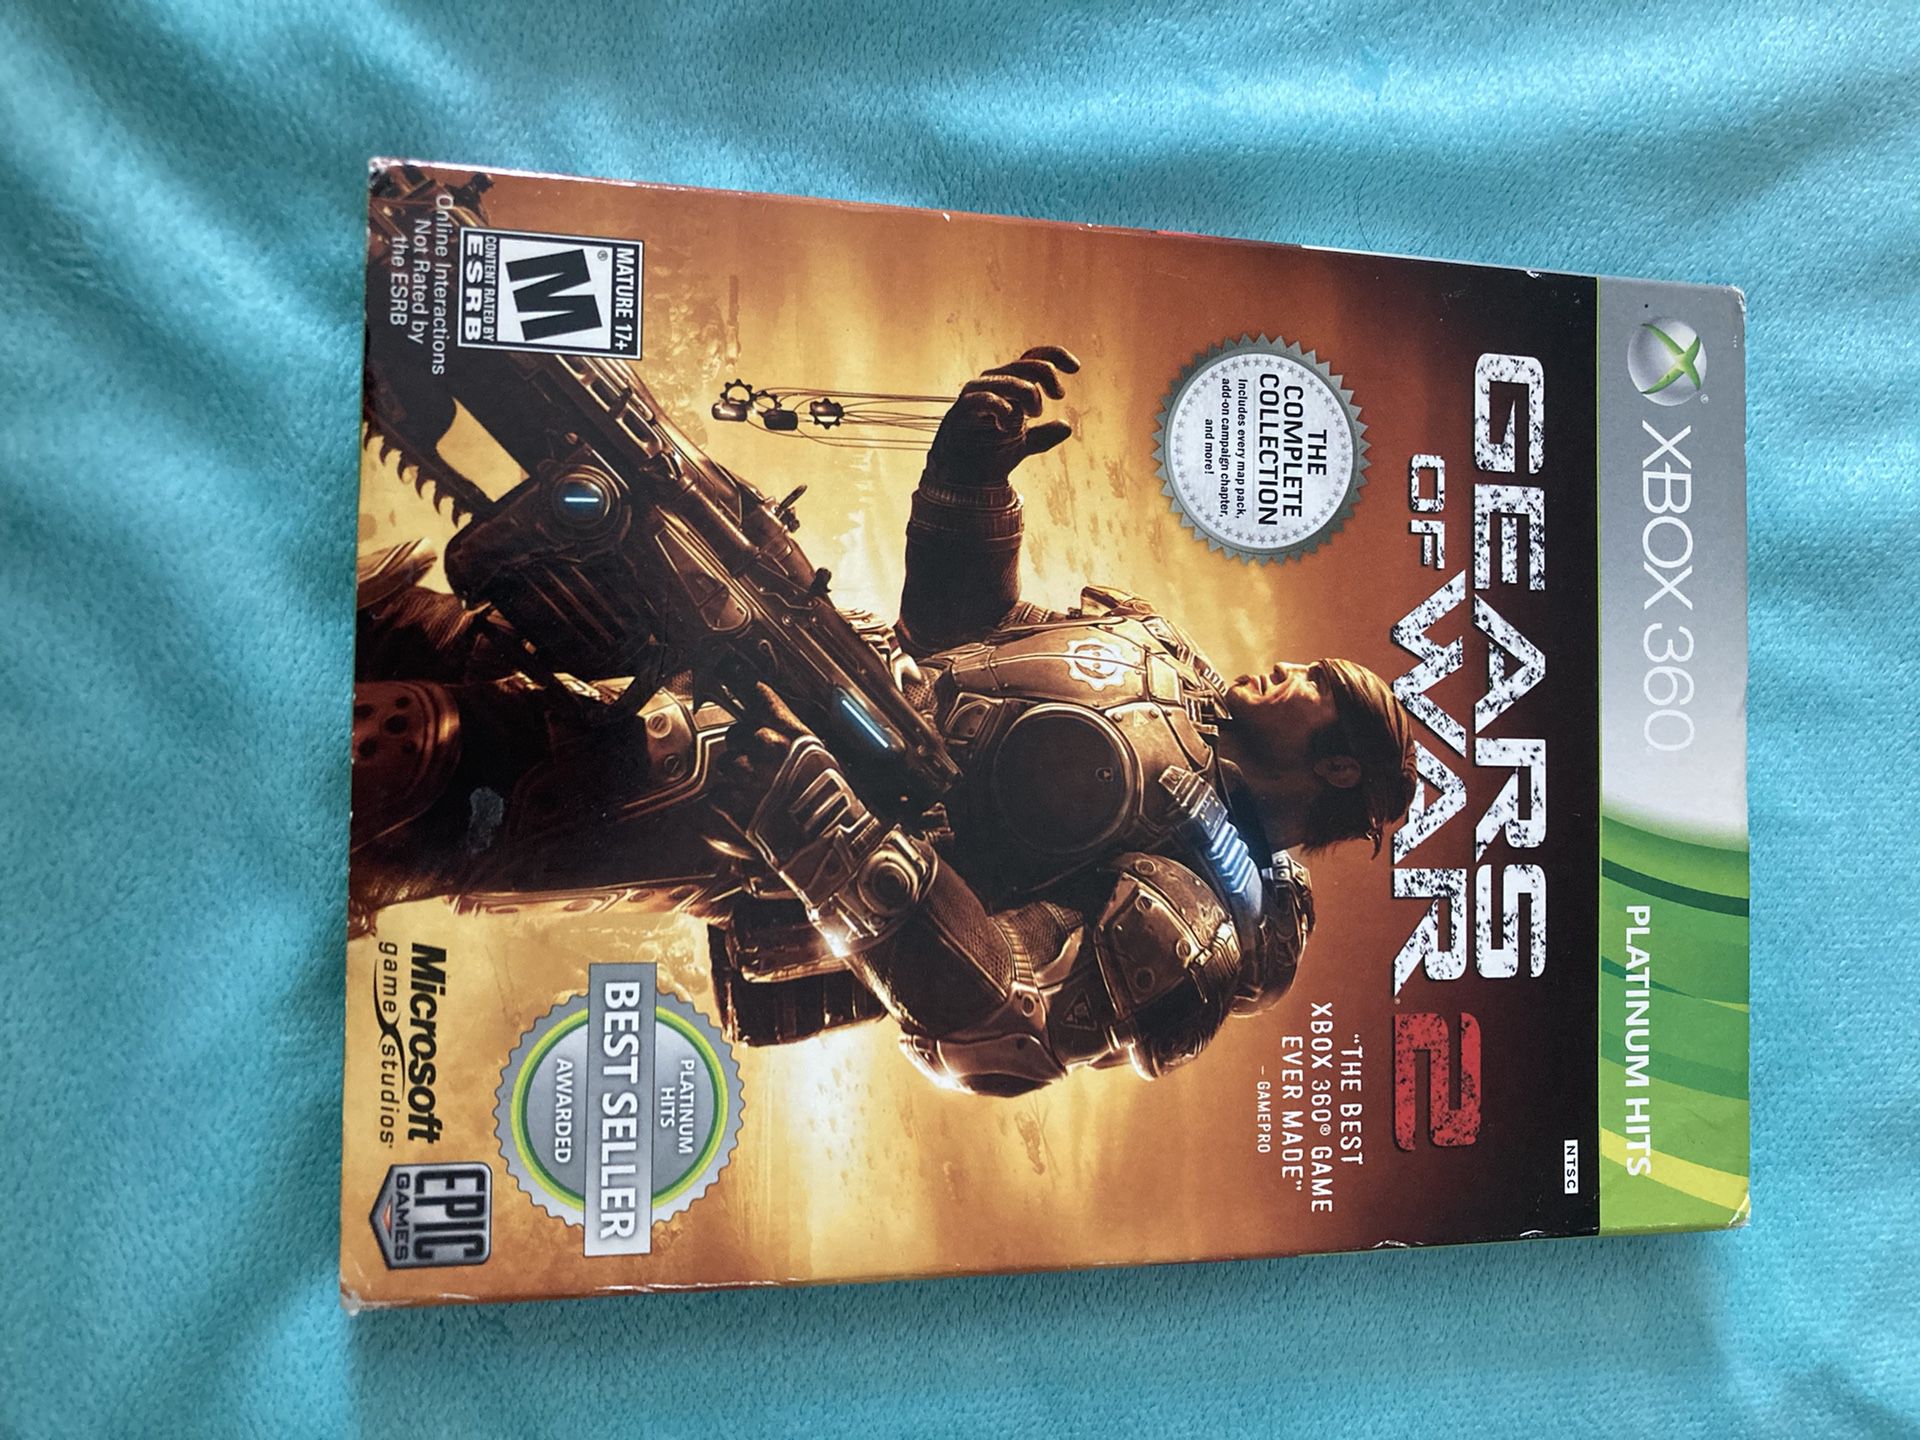 Gears Of War 2 For Xbox 360